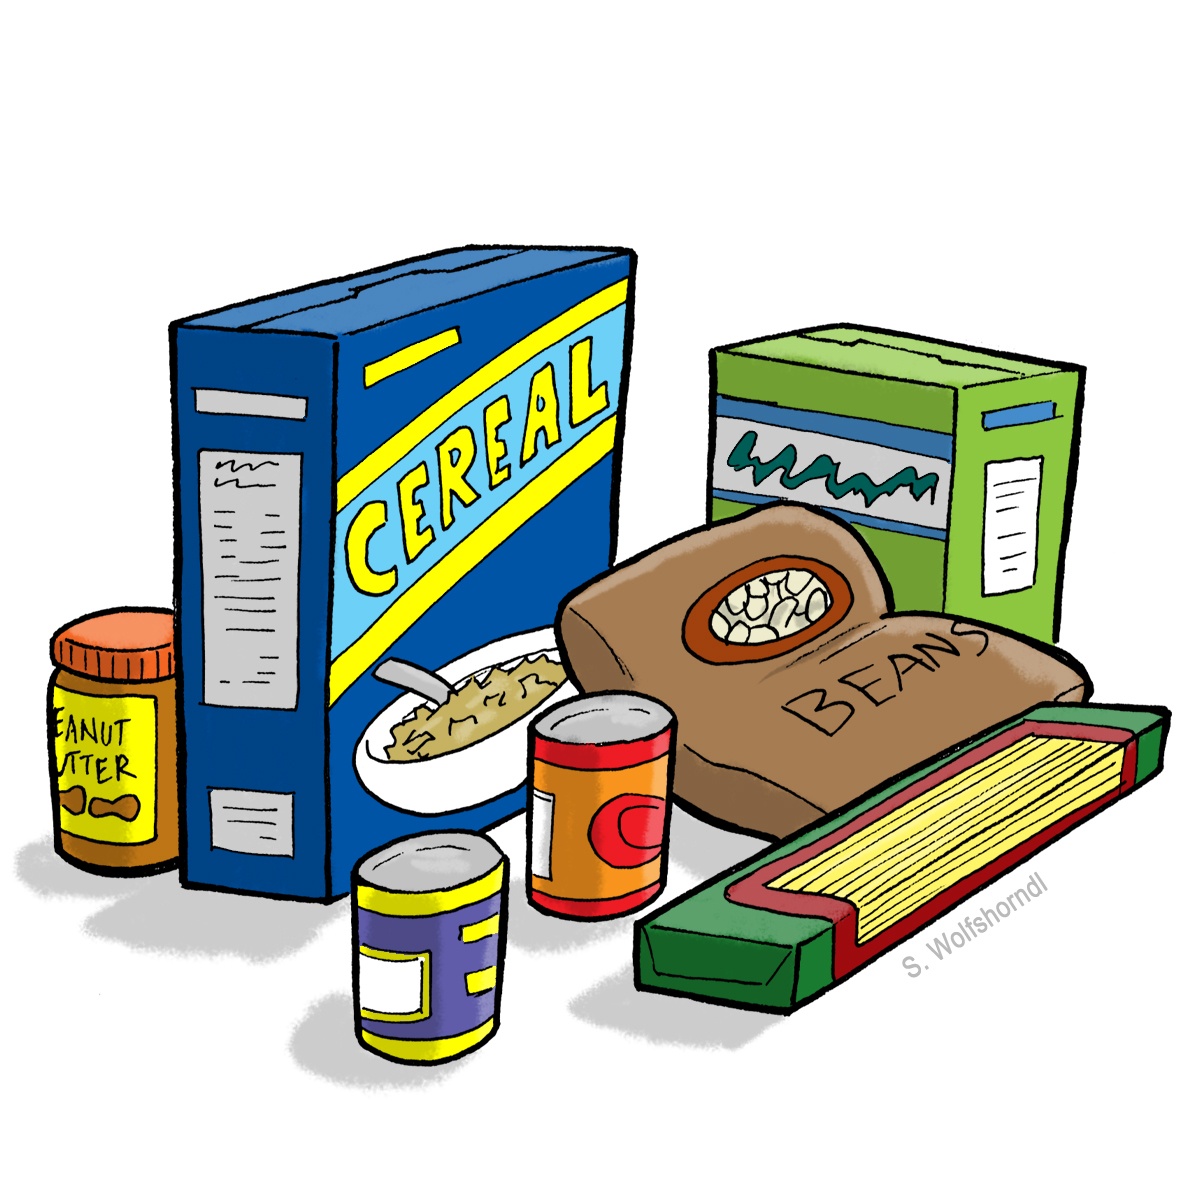 pantry clipart - Canned Food Clip Art